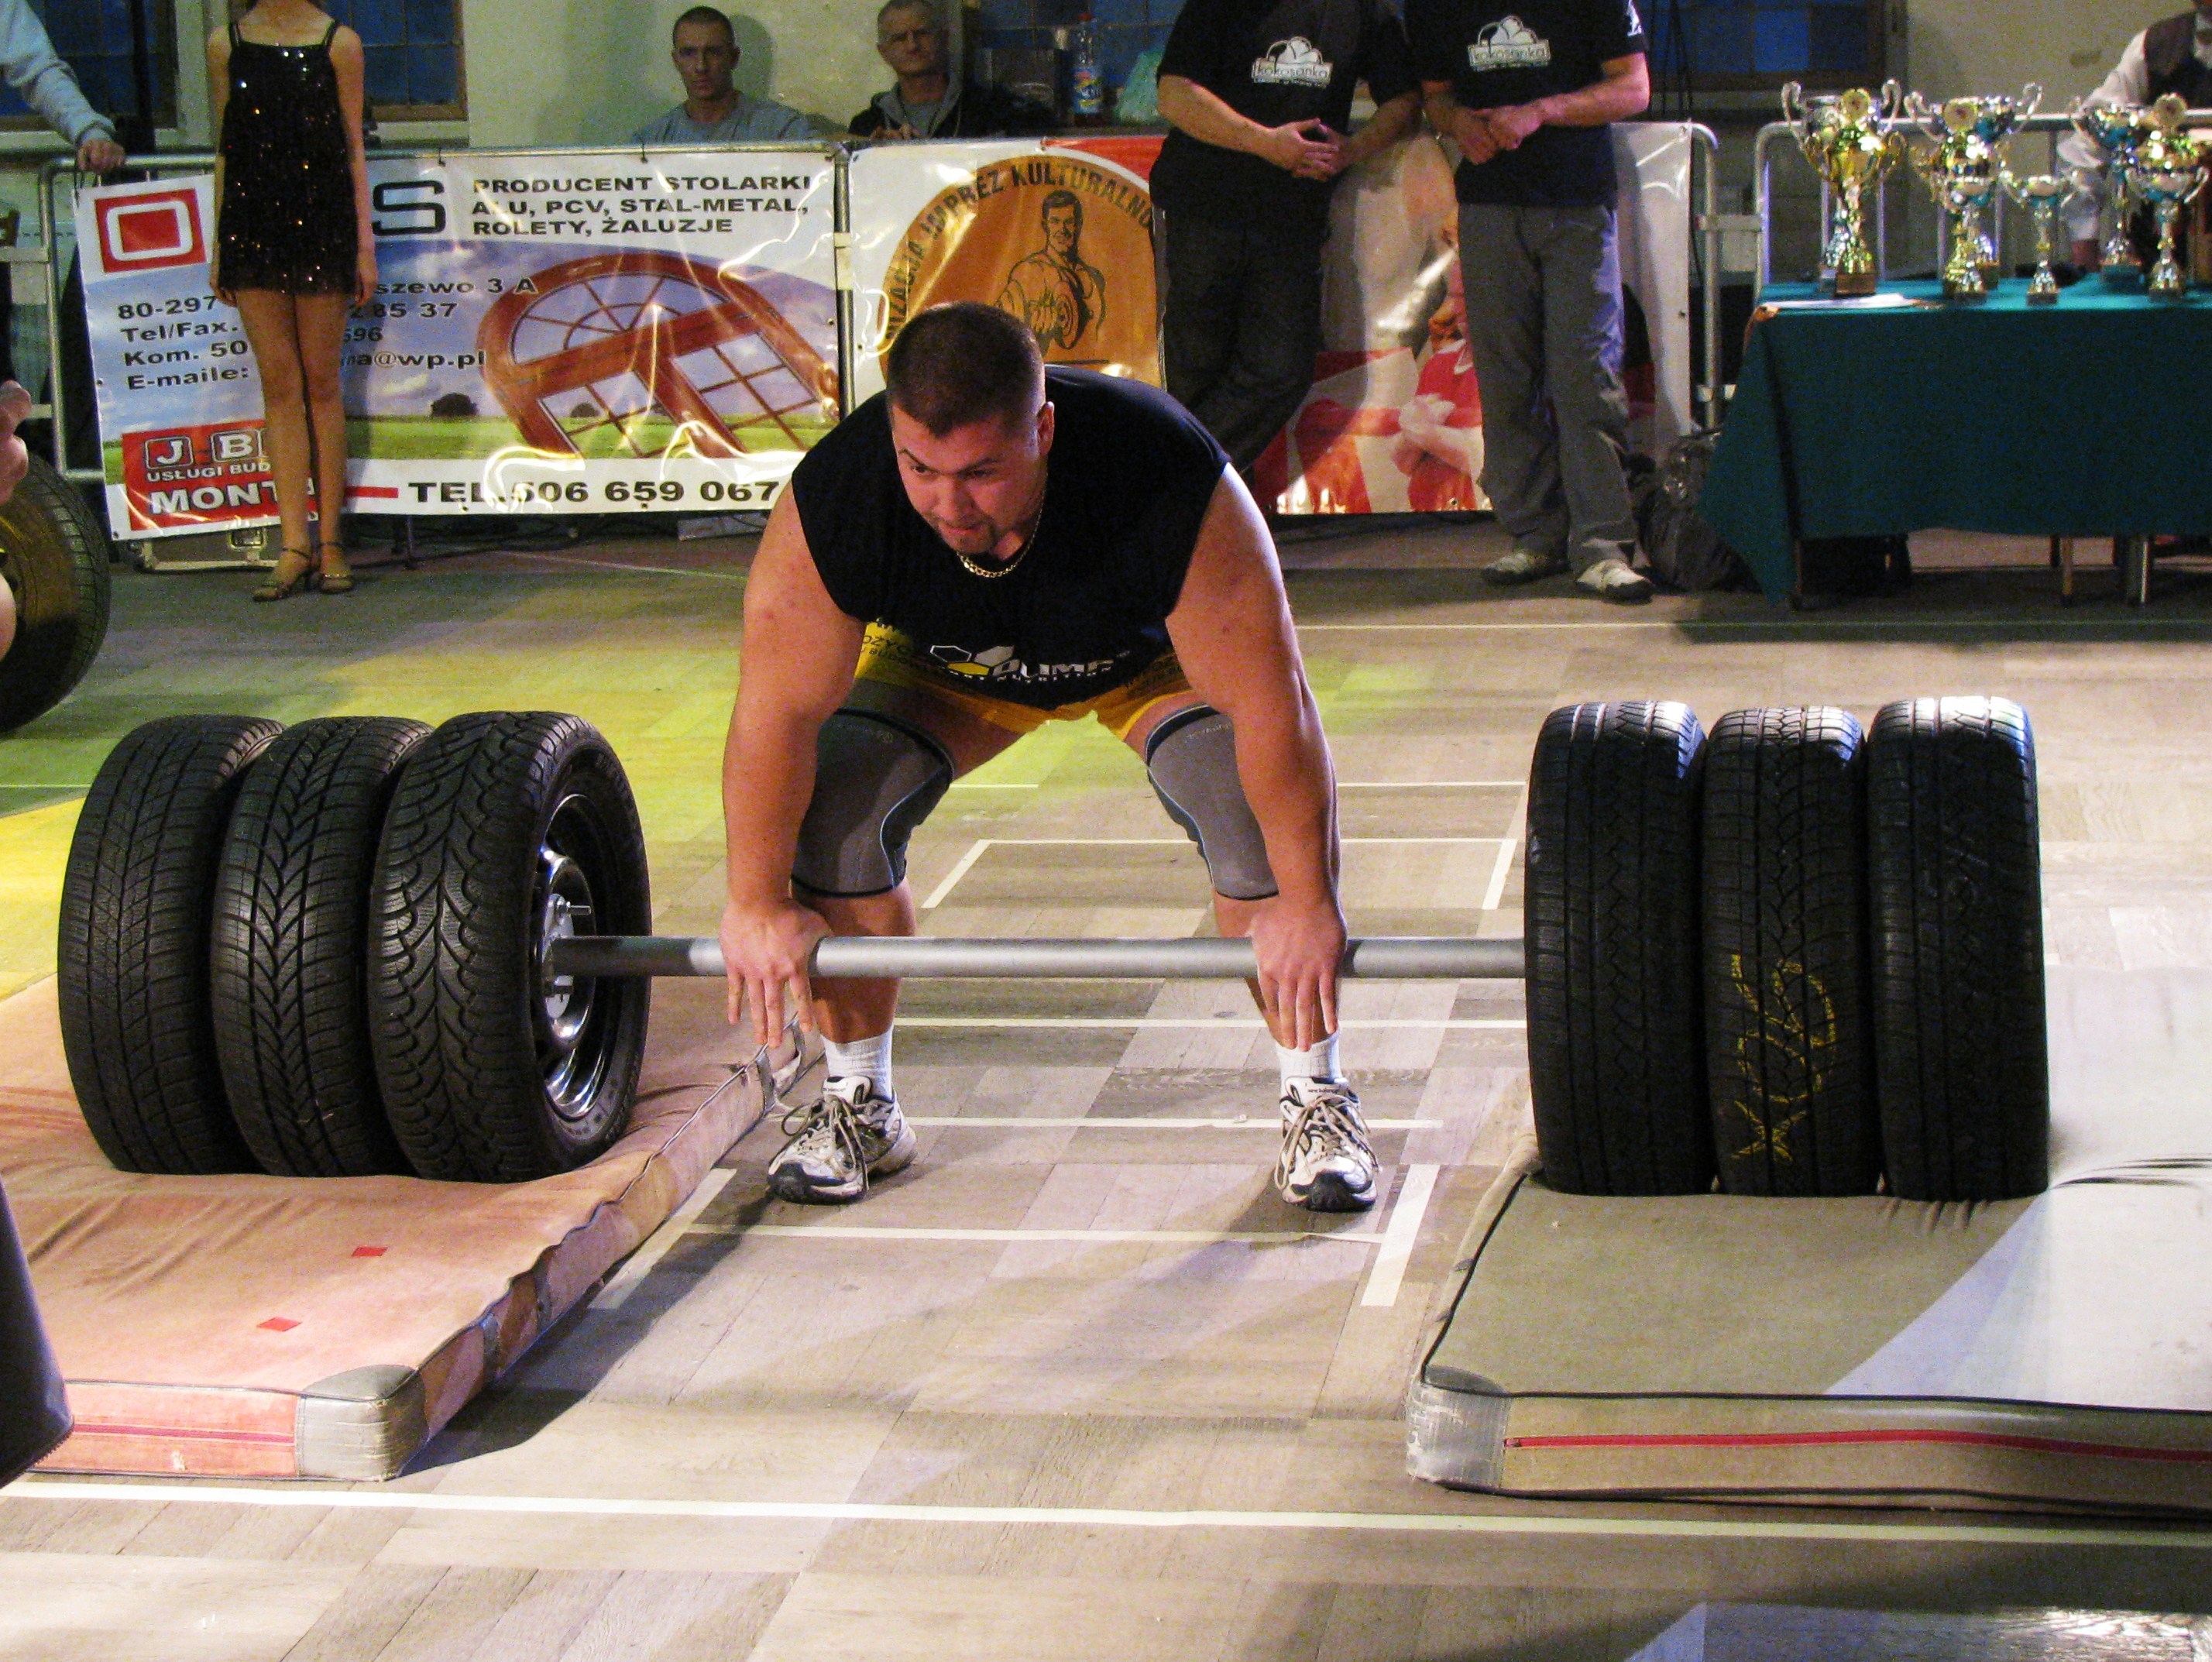 axle barbell during the deadlift improves grip strength